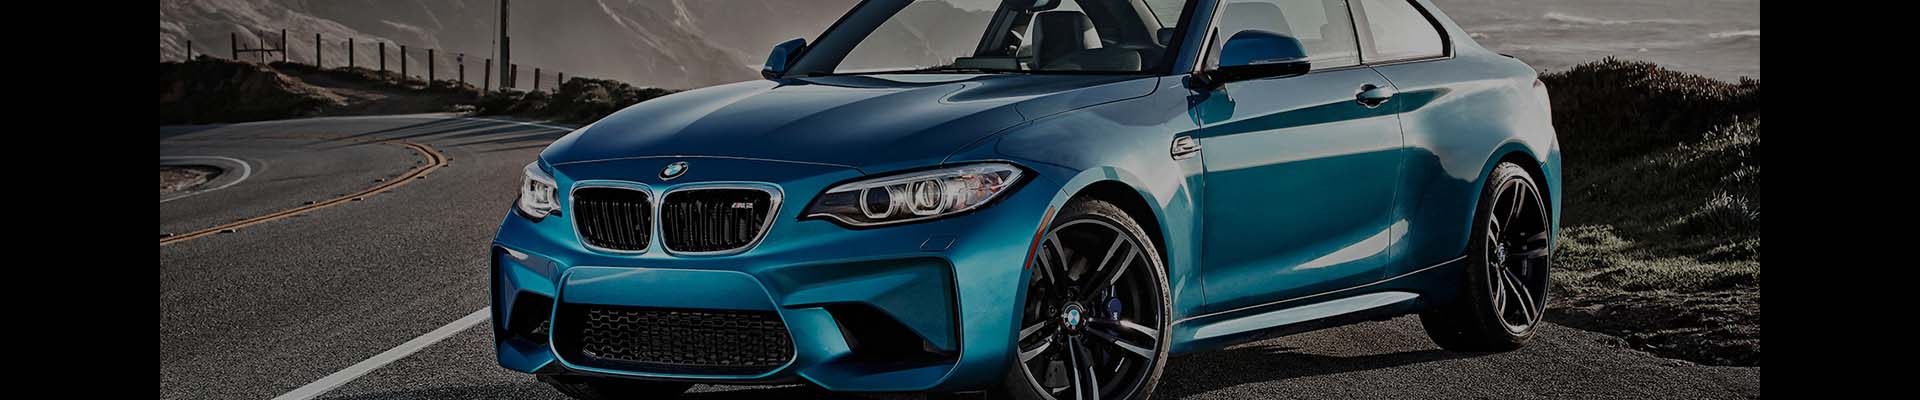 Shop Genuine OE Parts for BMW